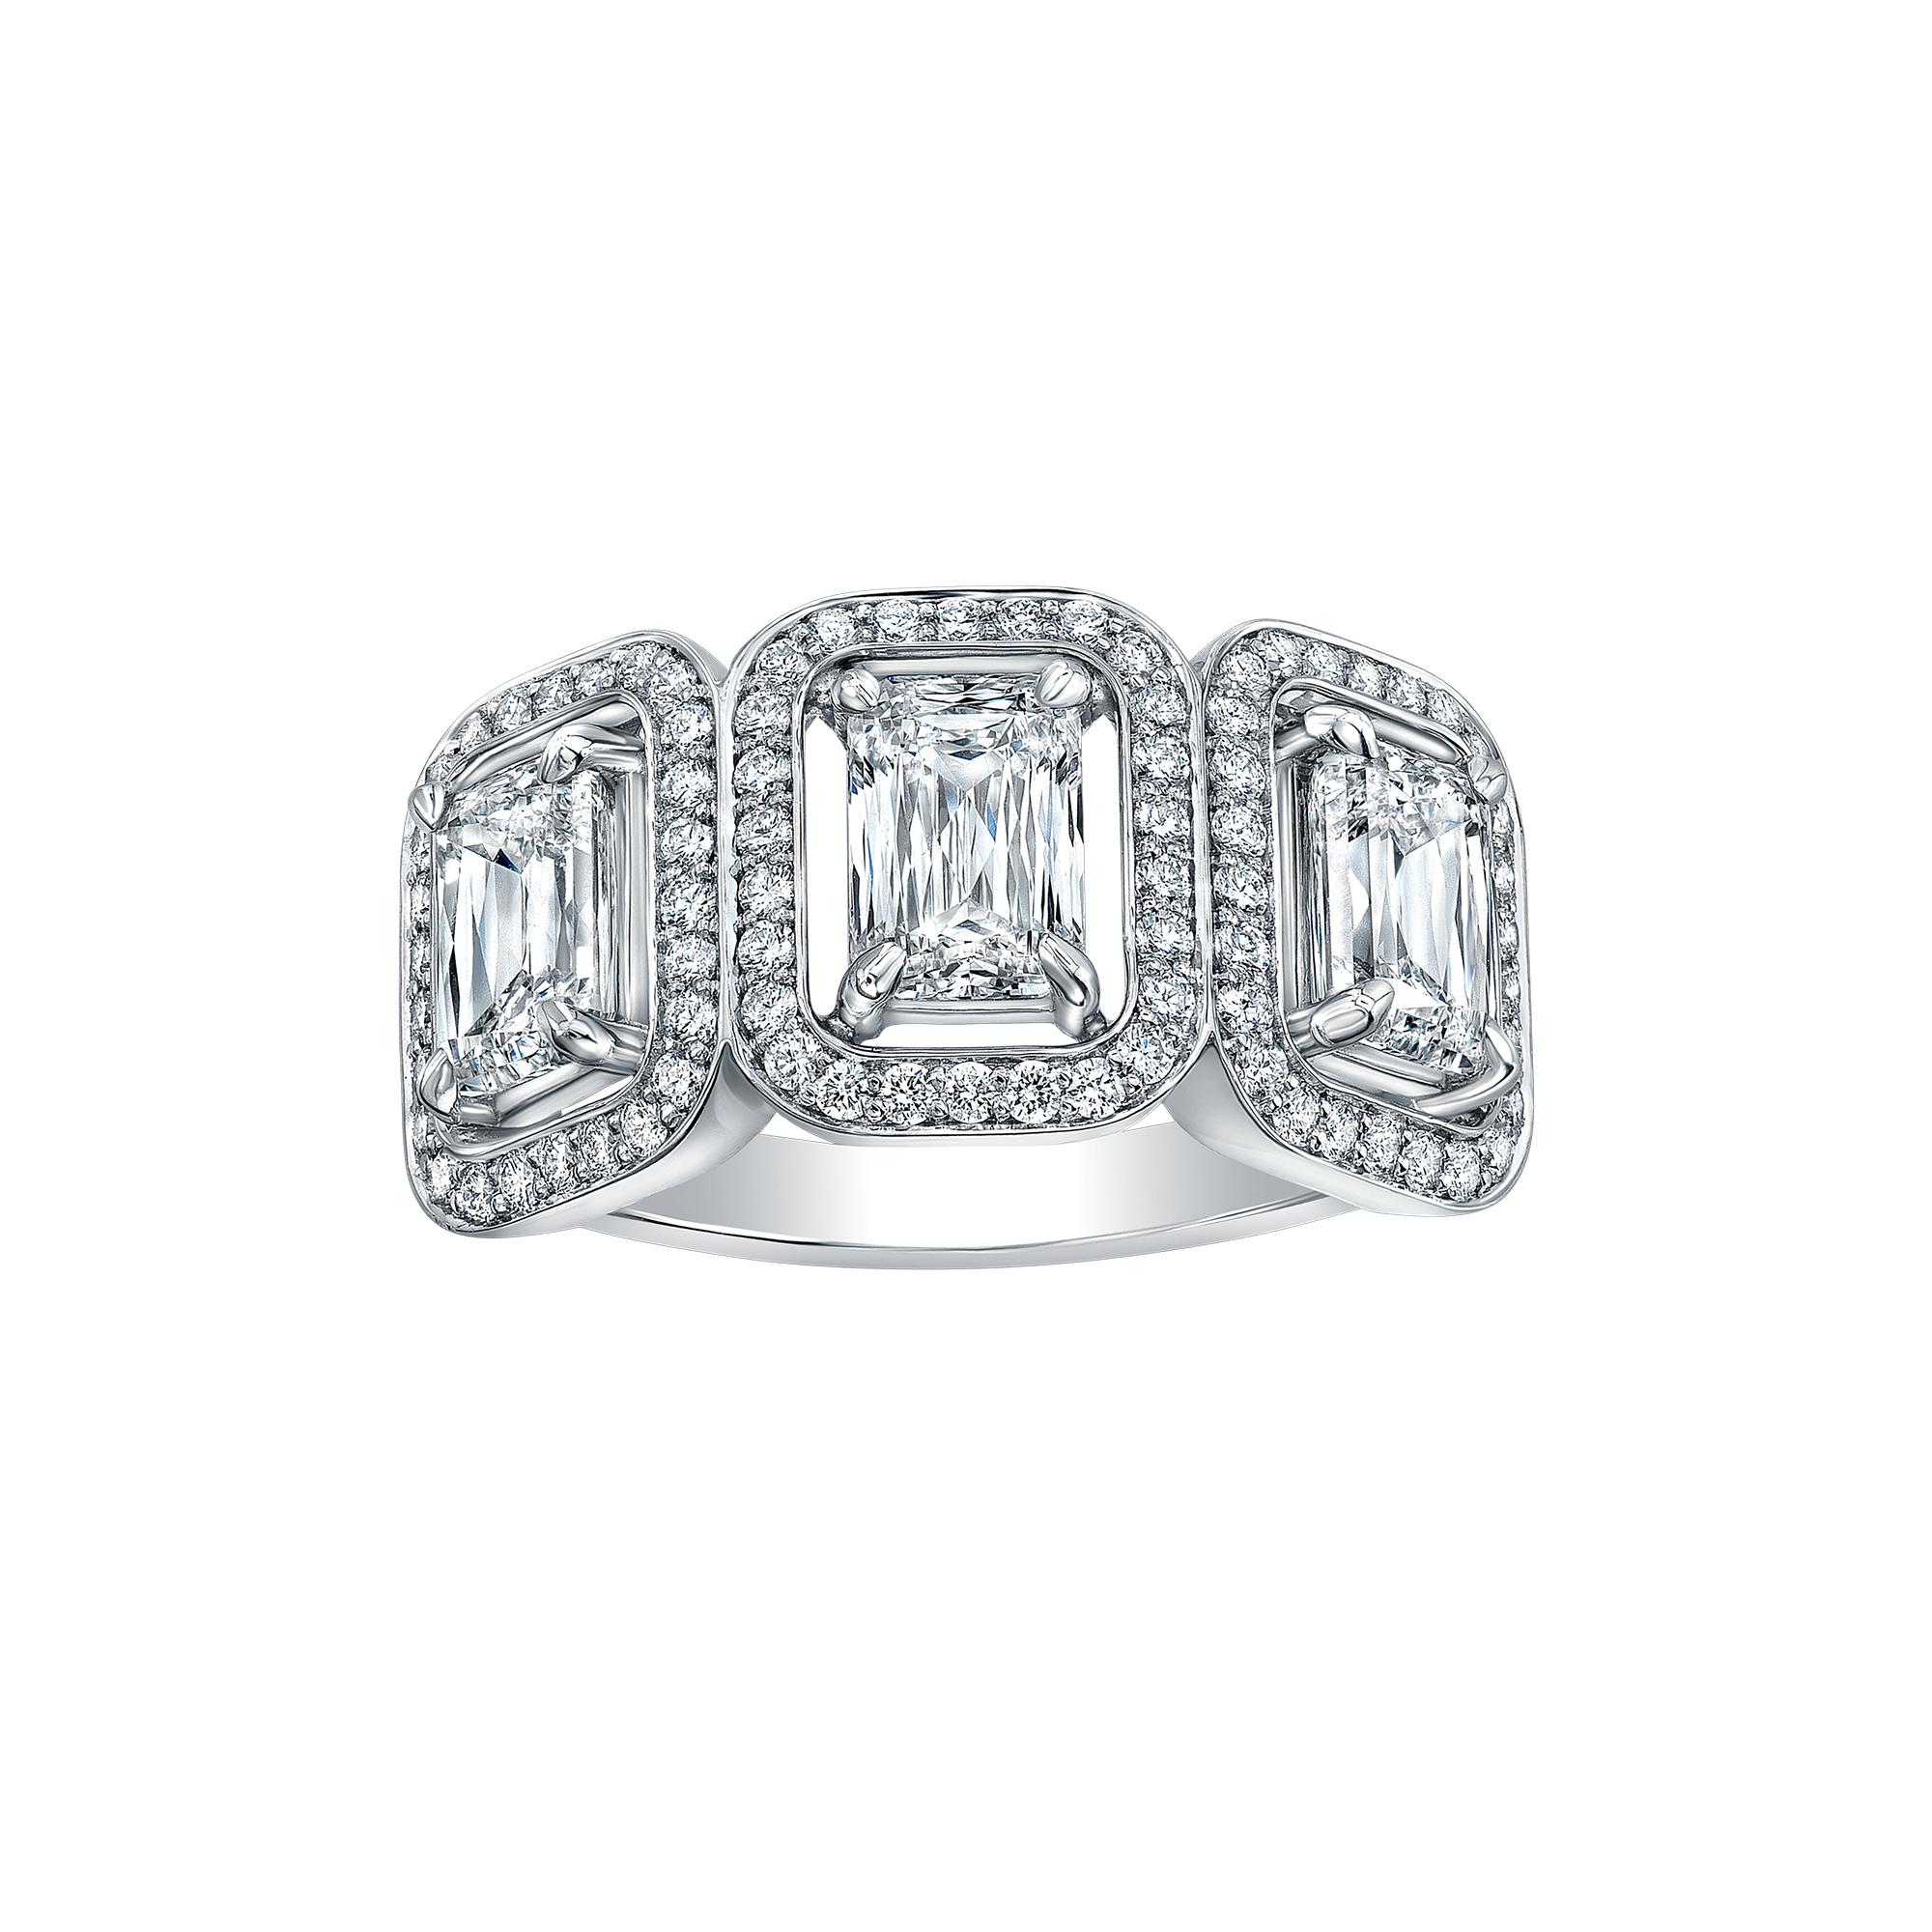 Shape and Cutting Style - Round Cornered Rectangular Modified Brilliant
3 stones 2.33 carat total weight  
Platinum pave 
Color  I  Clarity VS1 - VS2   
Ring Size 6.5
